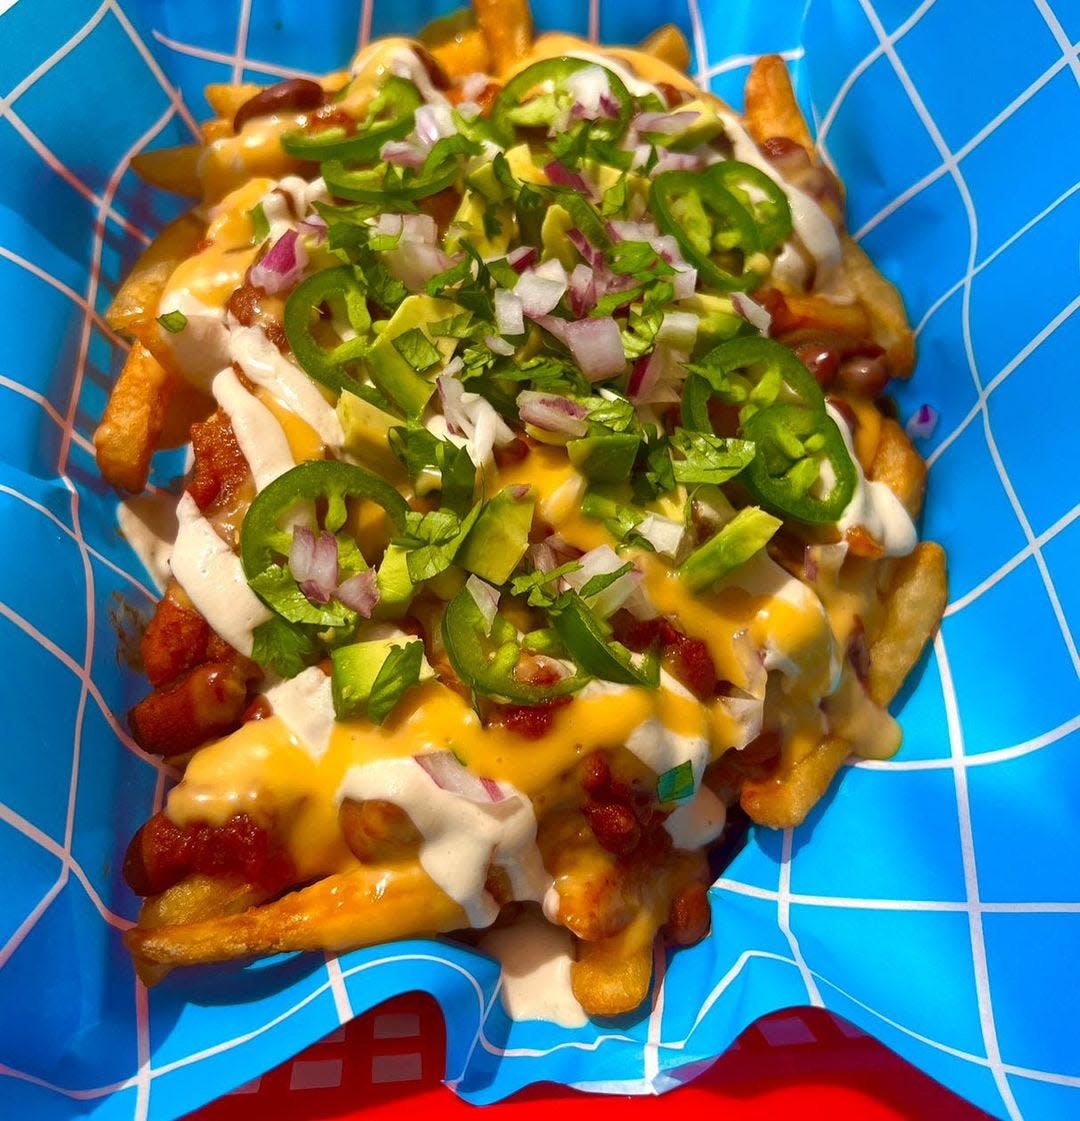 Plant-based loaded chili cheese fries at Dale & Dollops, a vegan restaurant that opened this summer in Ocean Grove.